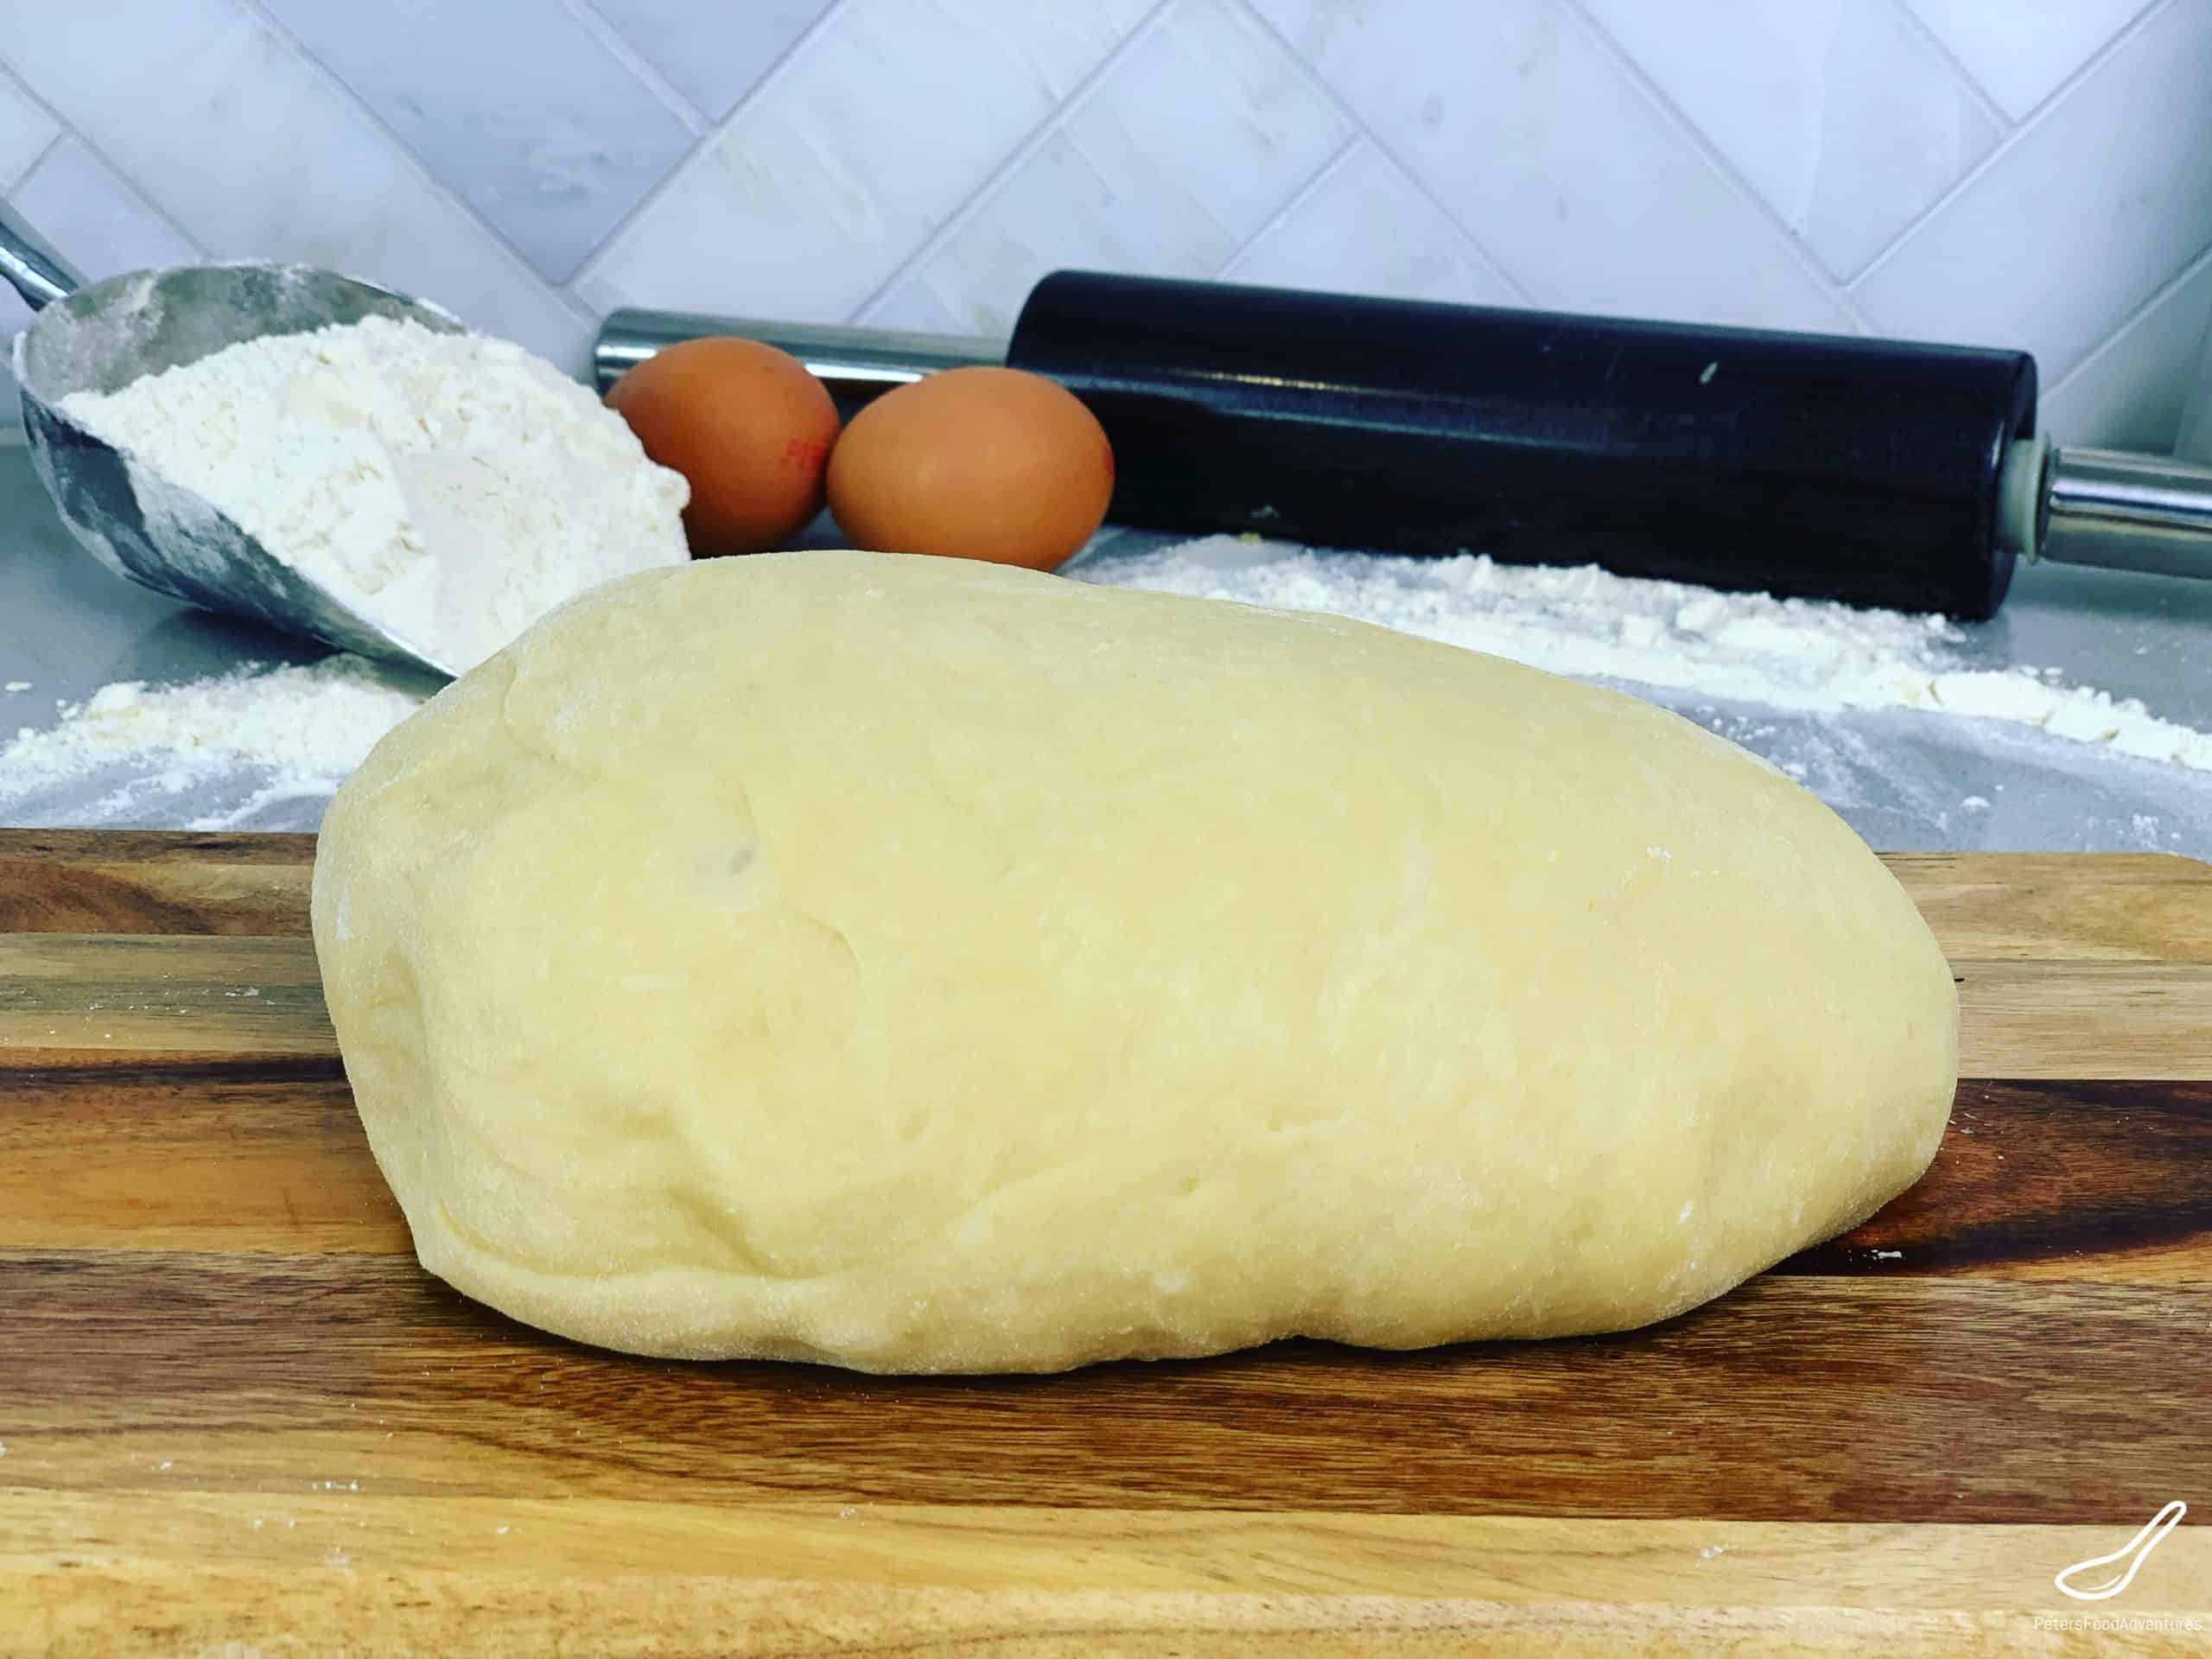 Yeast dough ball with rolling pin and flour